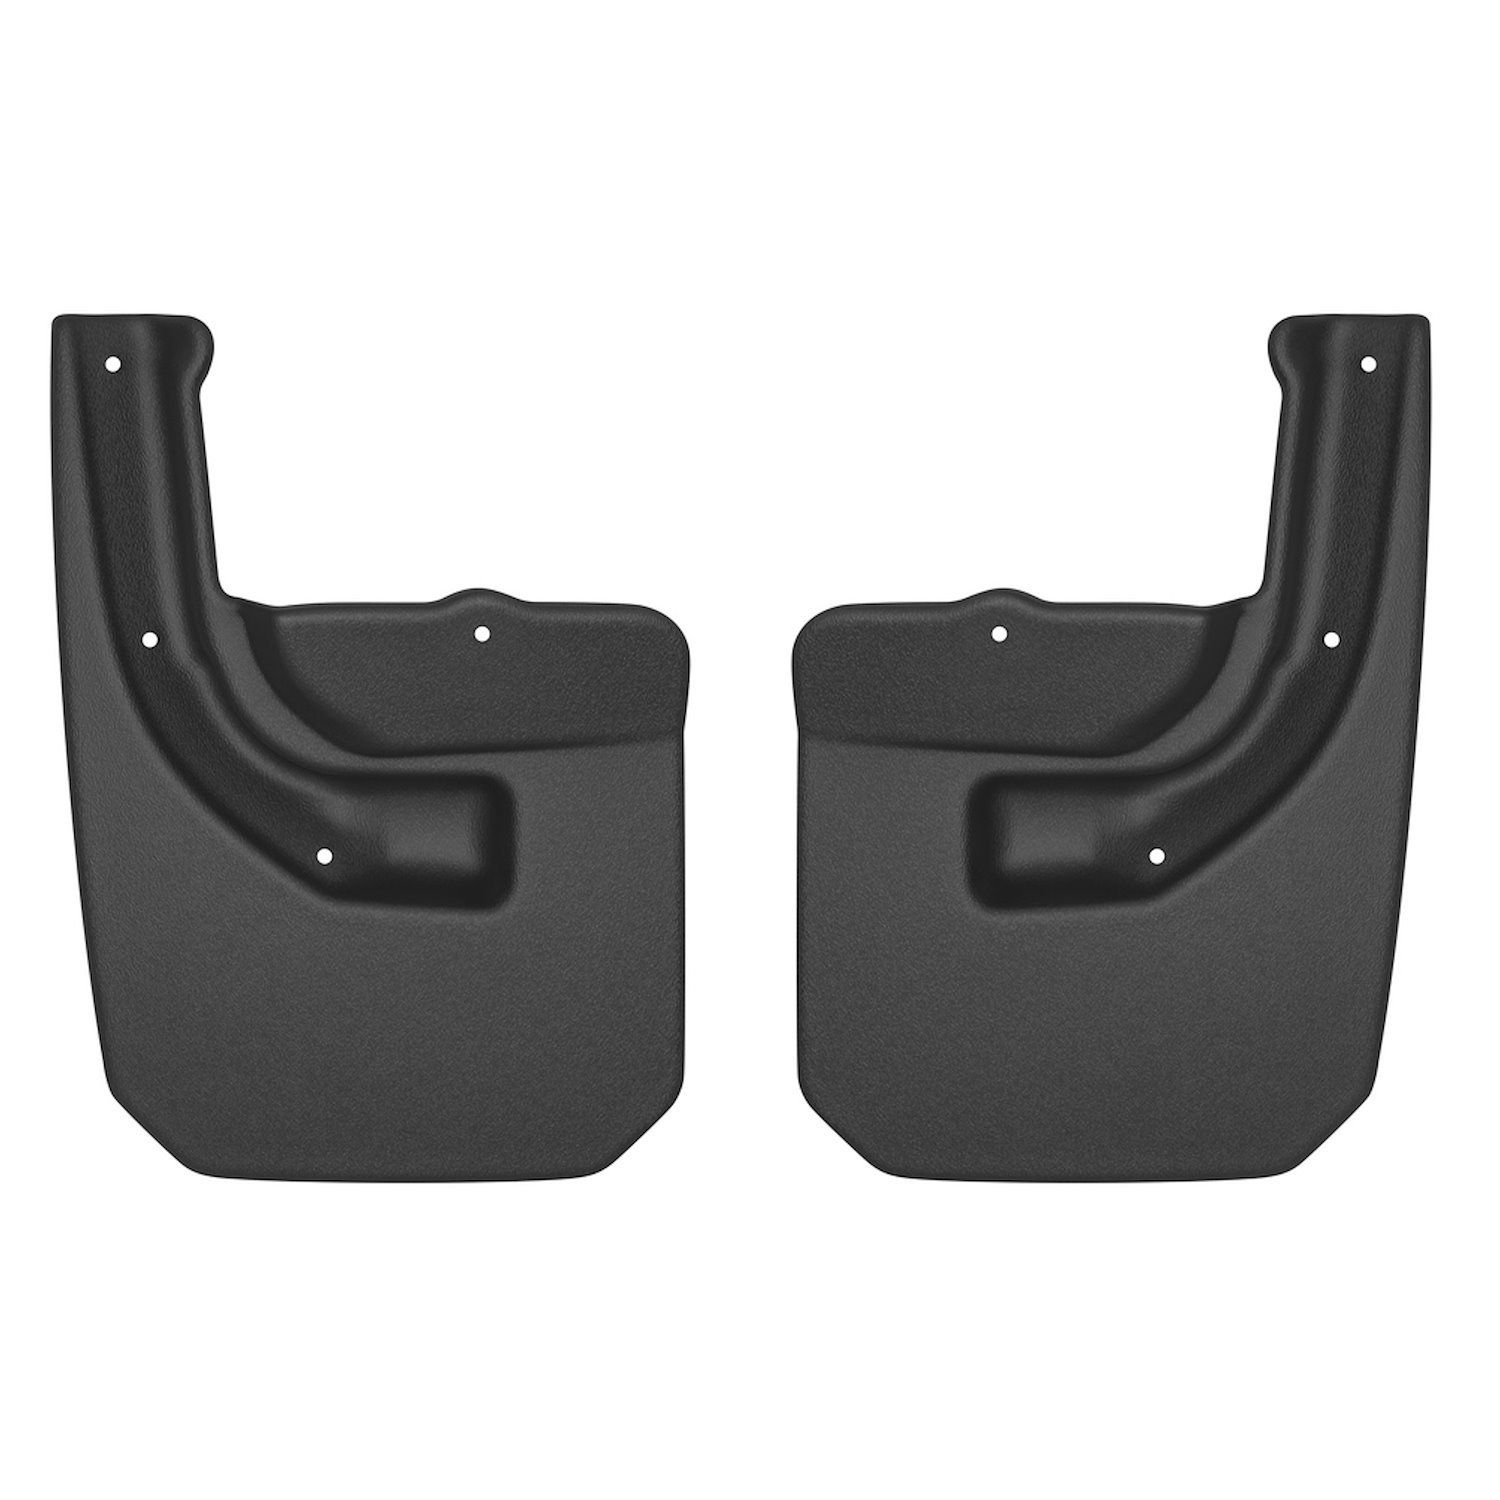 Custom Molded Rear Mud Guards for 2018-2019 Jeep